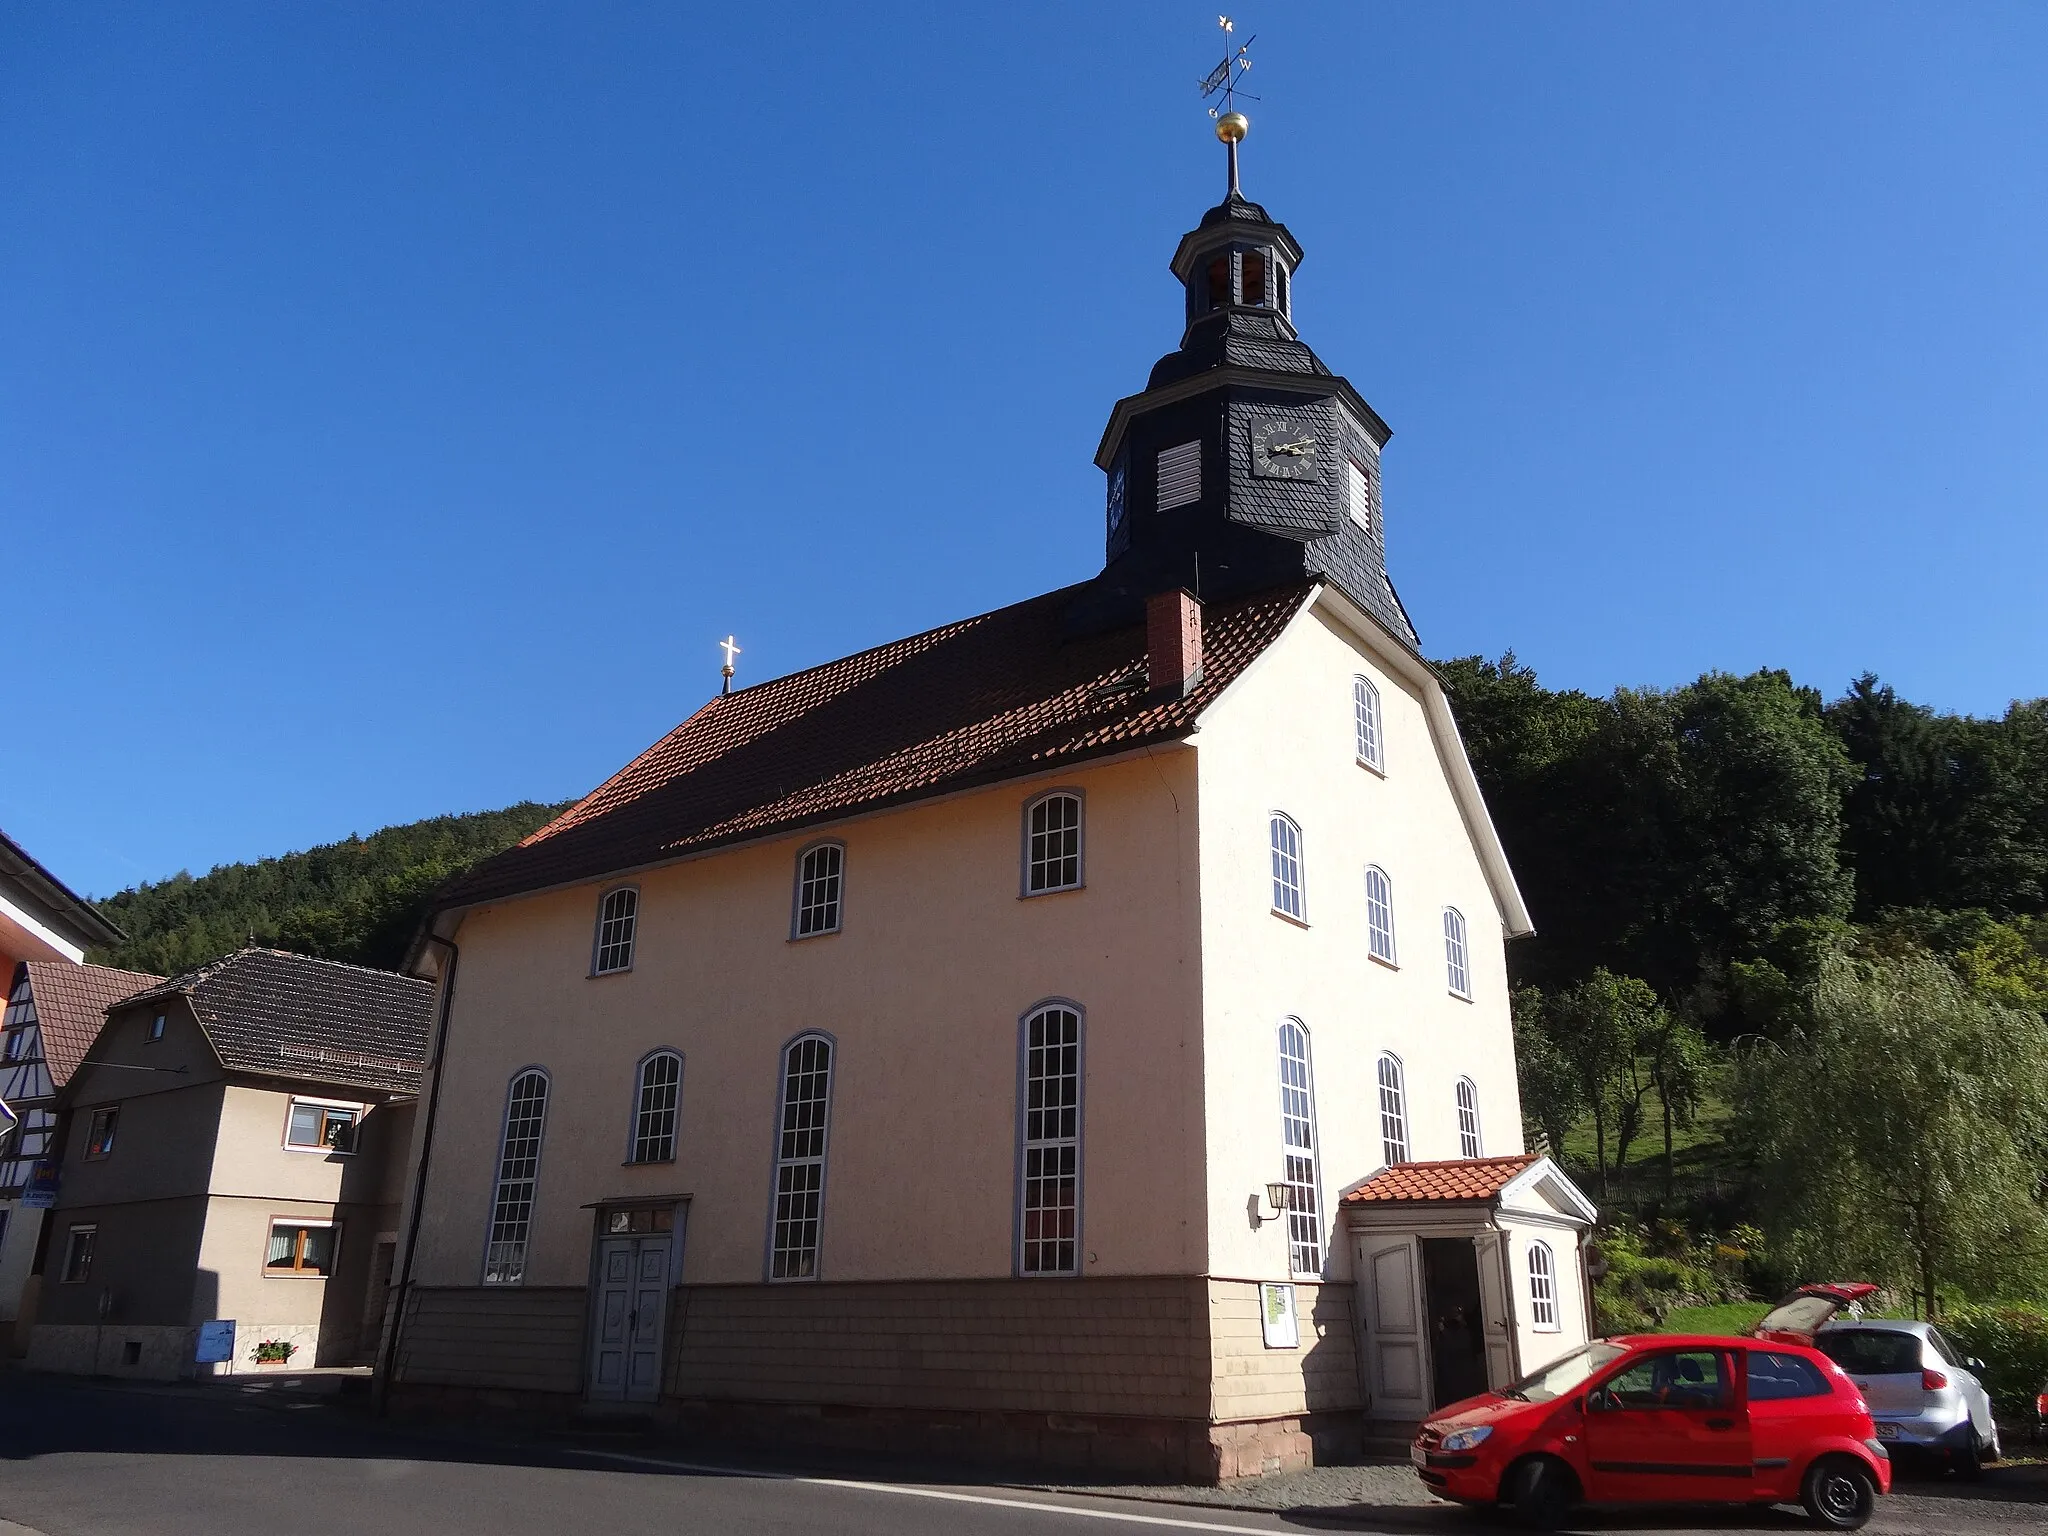 Photo showing: Church in Asbach (Schmalkalden), Thuringia, Germany